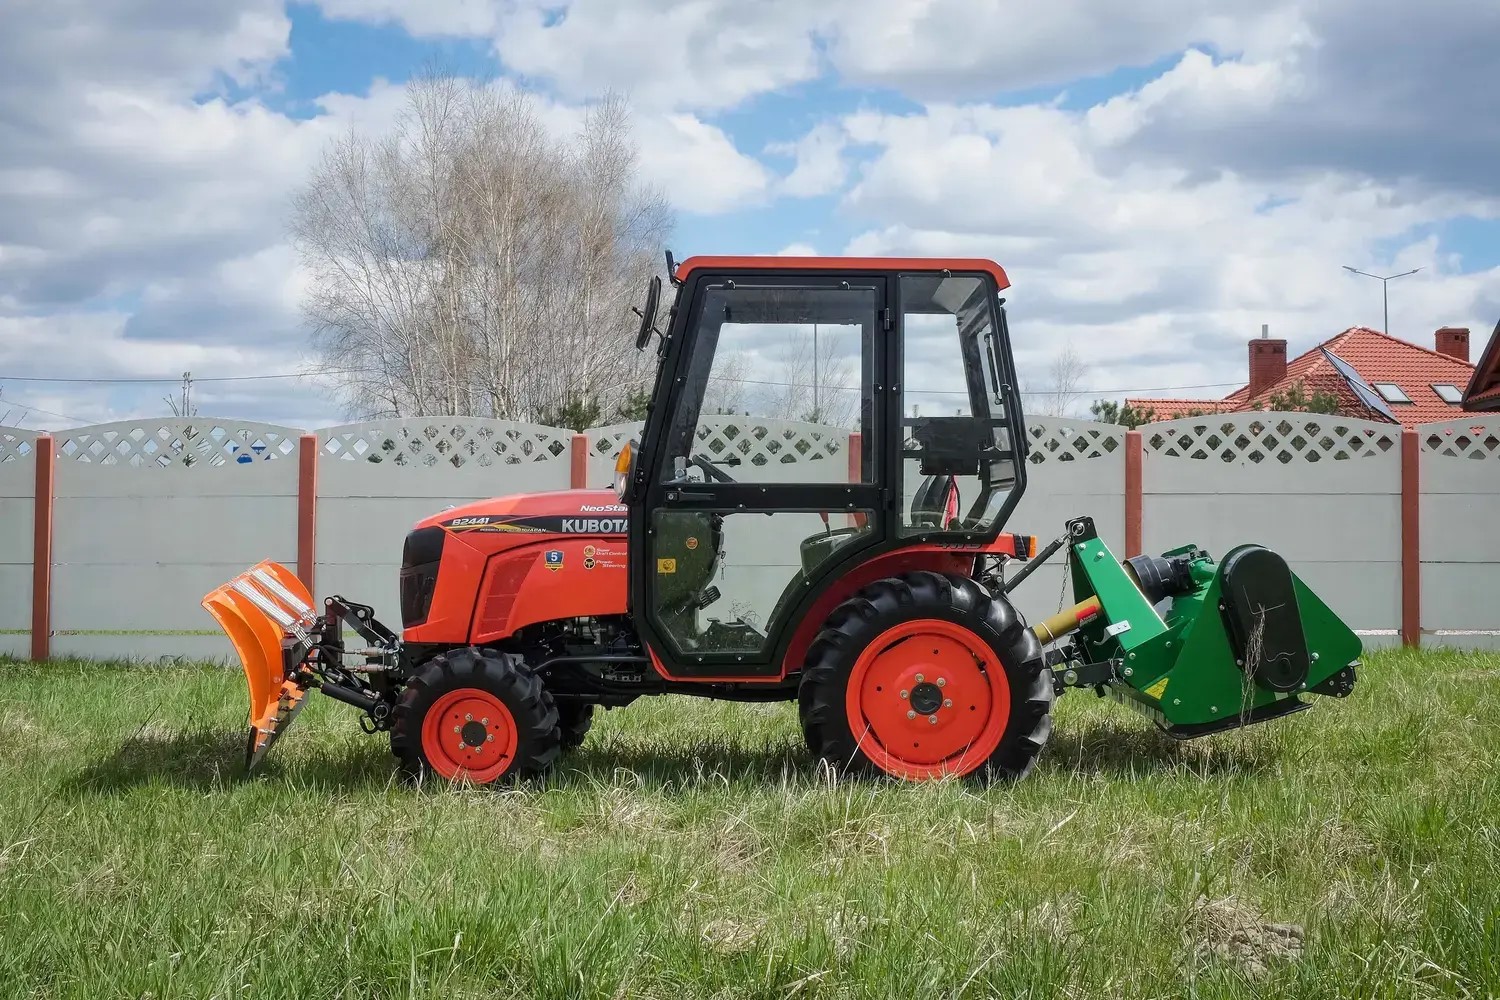 The NEW KUBOTA B2441 tractor is on its way to the customer.